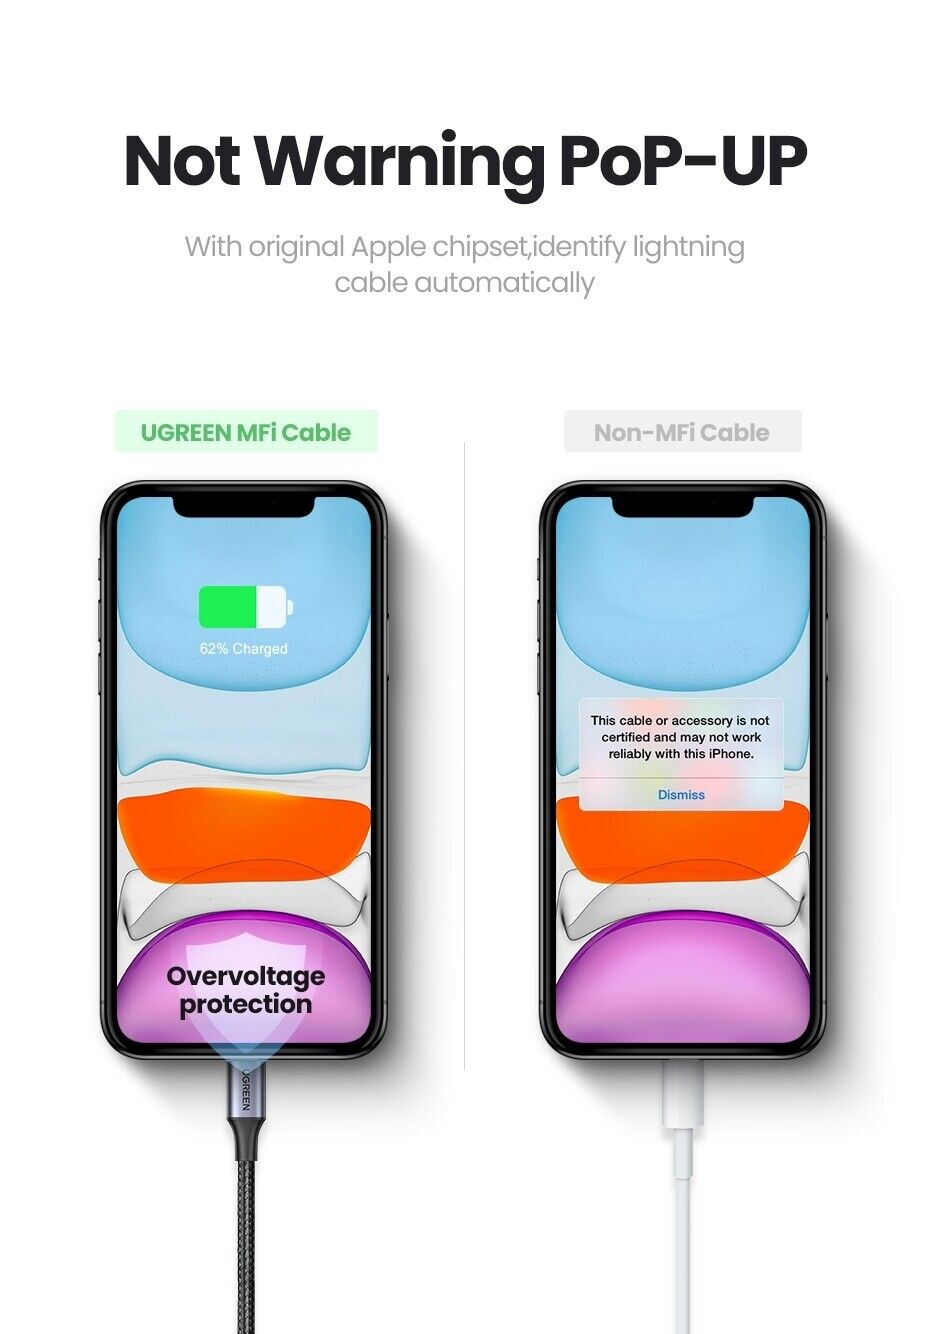 UGreen Armored USB A to Apple Lightning Cable